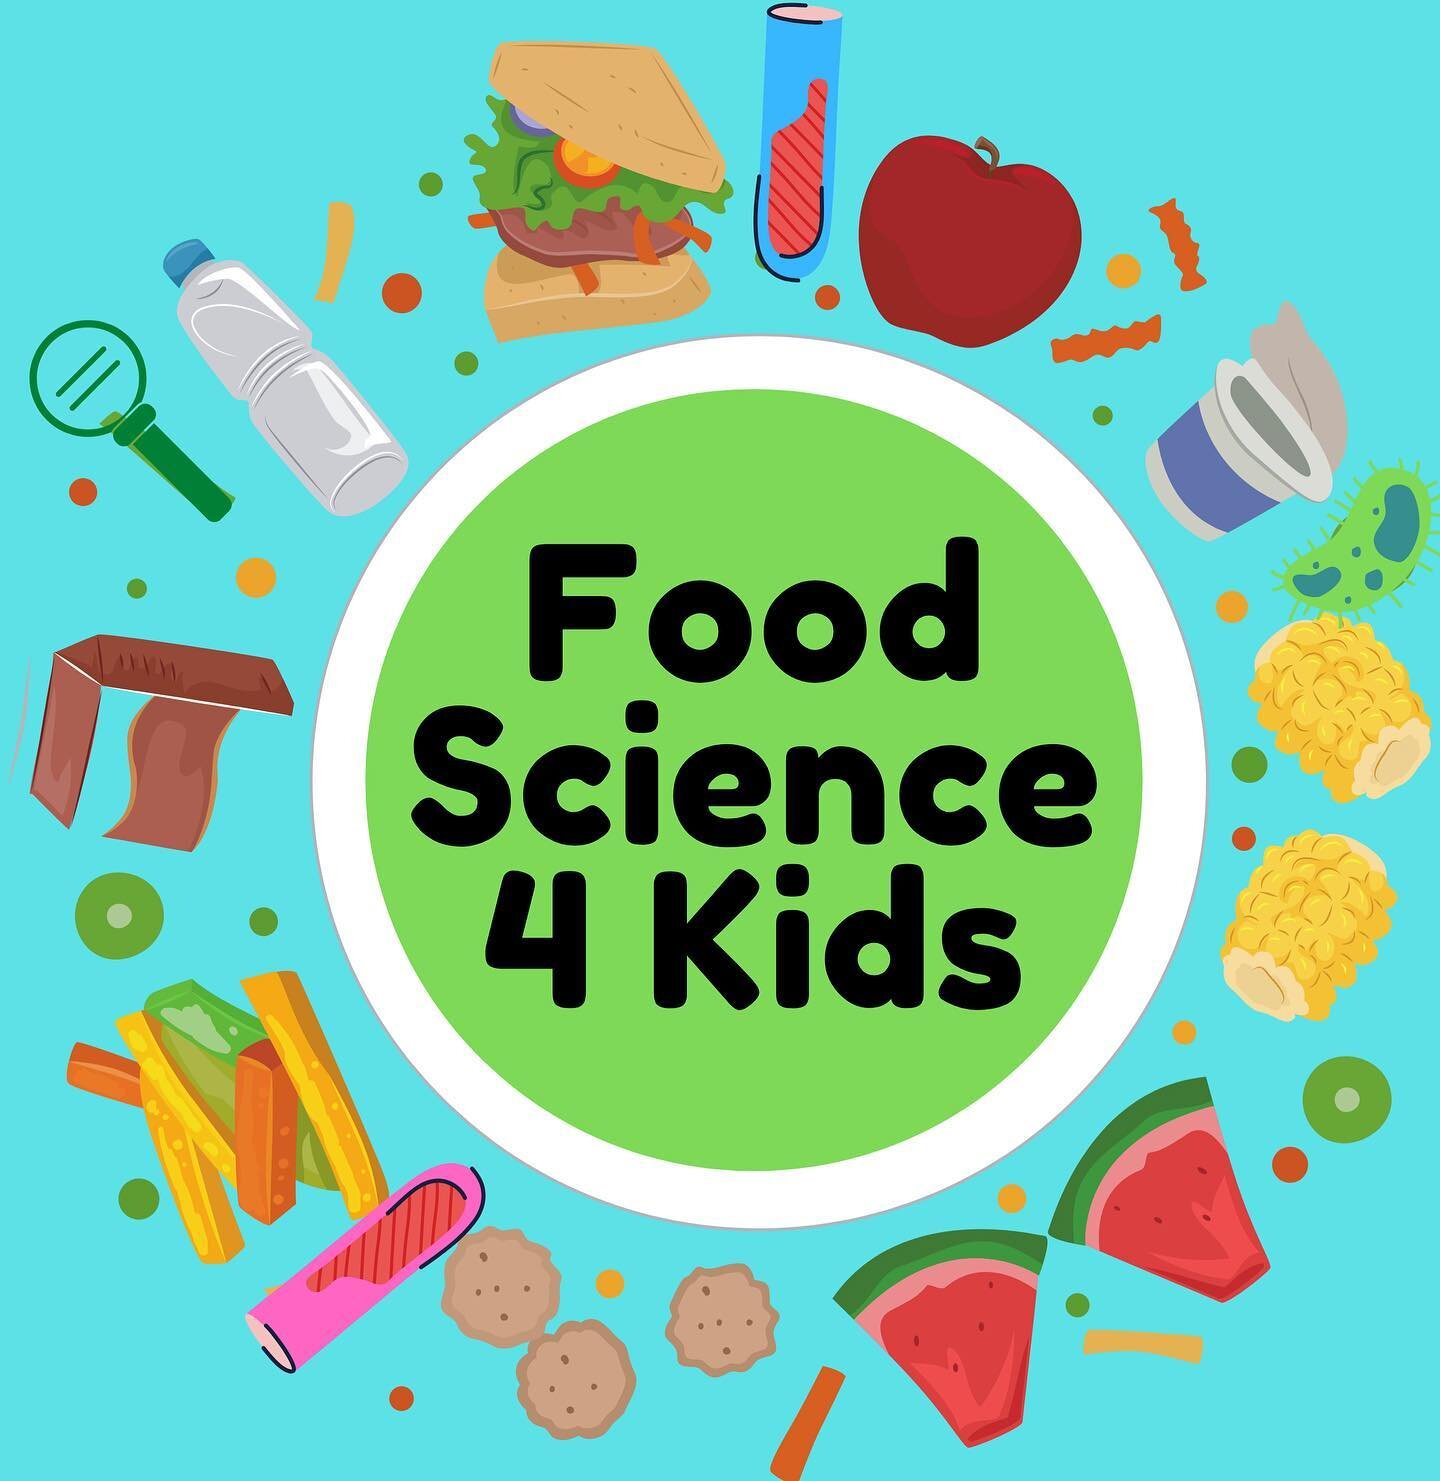 So proud of the little ones today! They almost tuckered out on the experiment but we made it! Join our next class May 26th @ 4pm CST. Sign up today at umamifcc.com!
.
.
.
.
#scienceexperiments #scienceactivities #foodscience4kids #kidsproject #kidsac